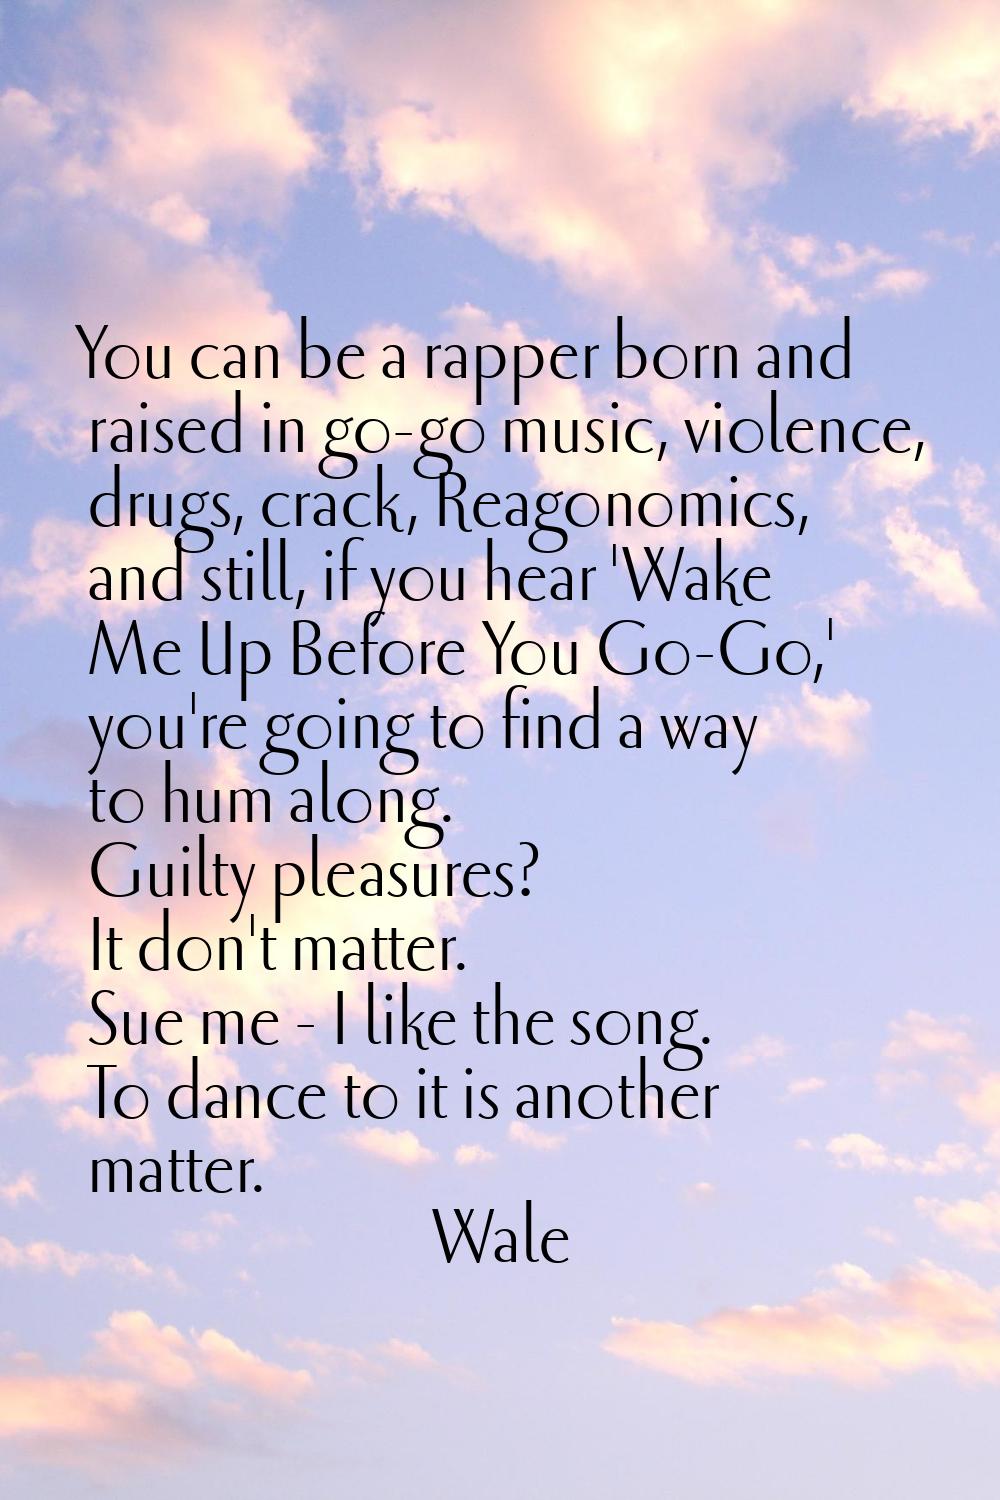 You can be a rapper born and raised in go-go music, violence, drugs, crack, Reagonomics, and still,